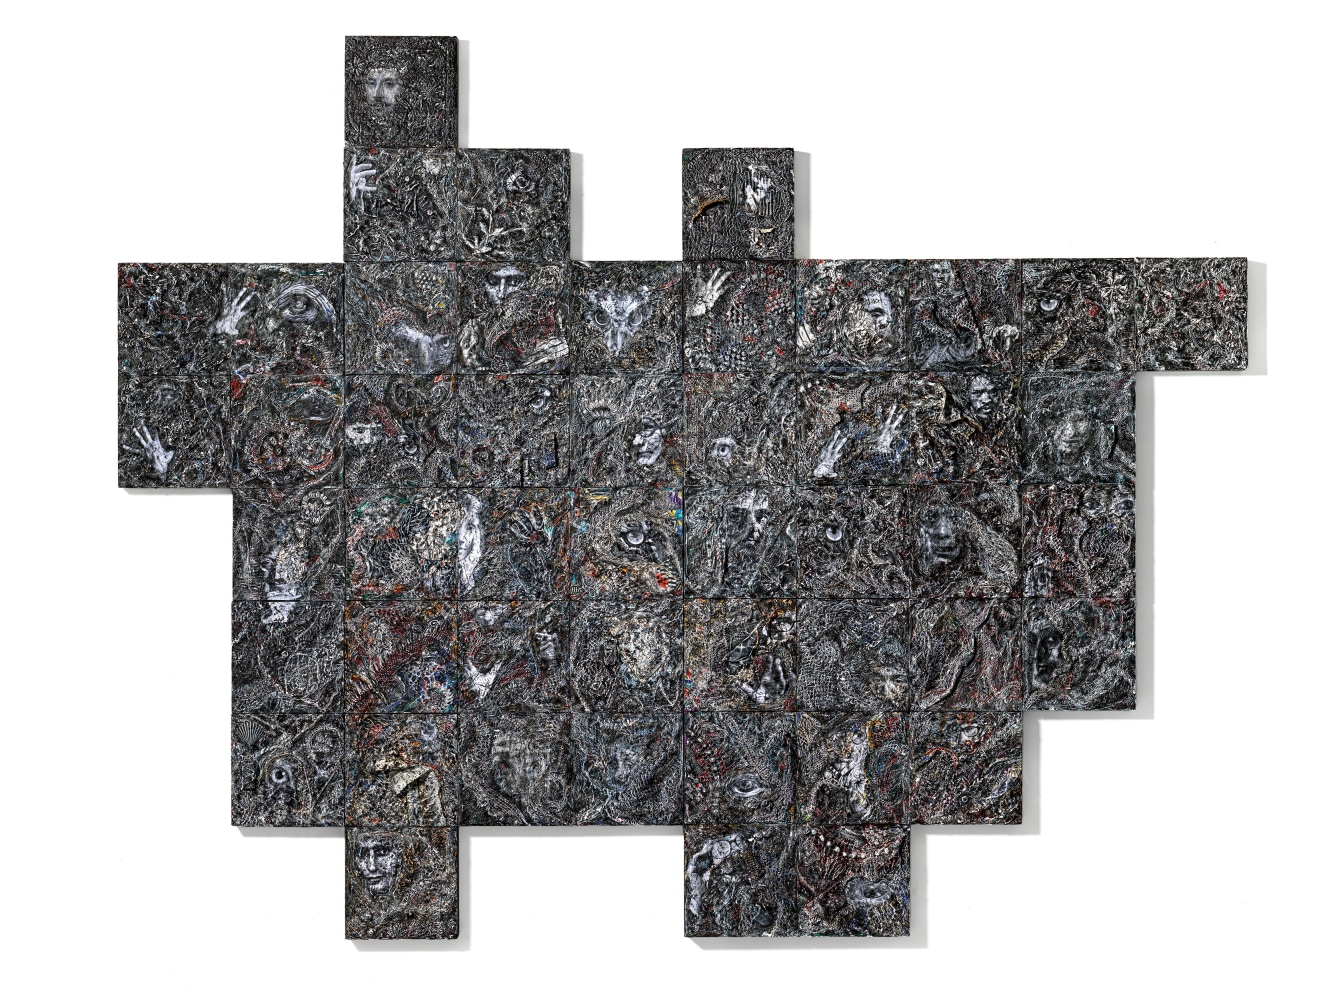 A dense relief constructed with myriad materials and images across wood blocks in overall grey tones.